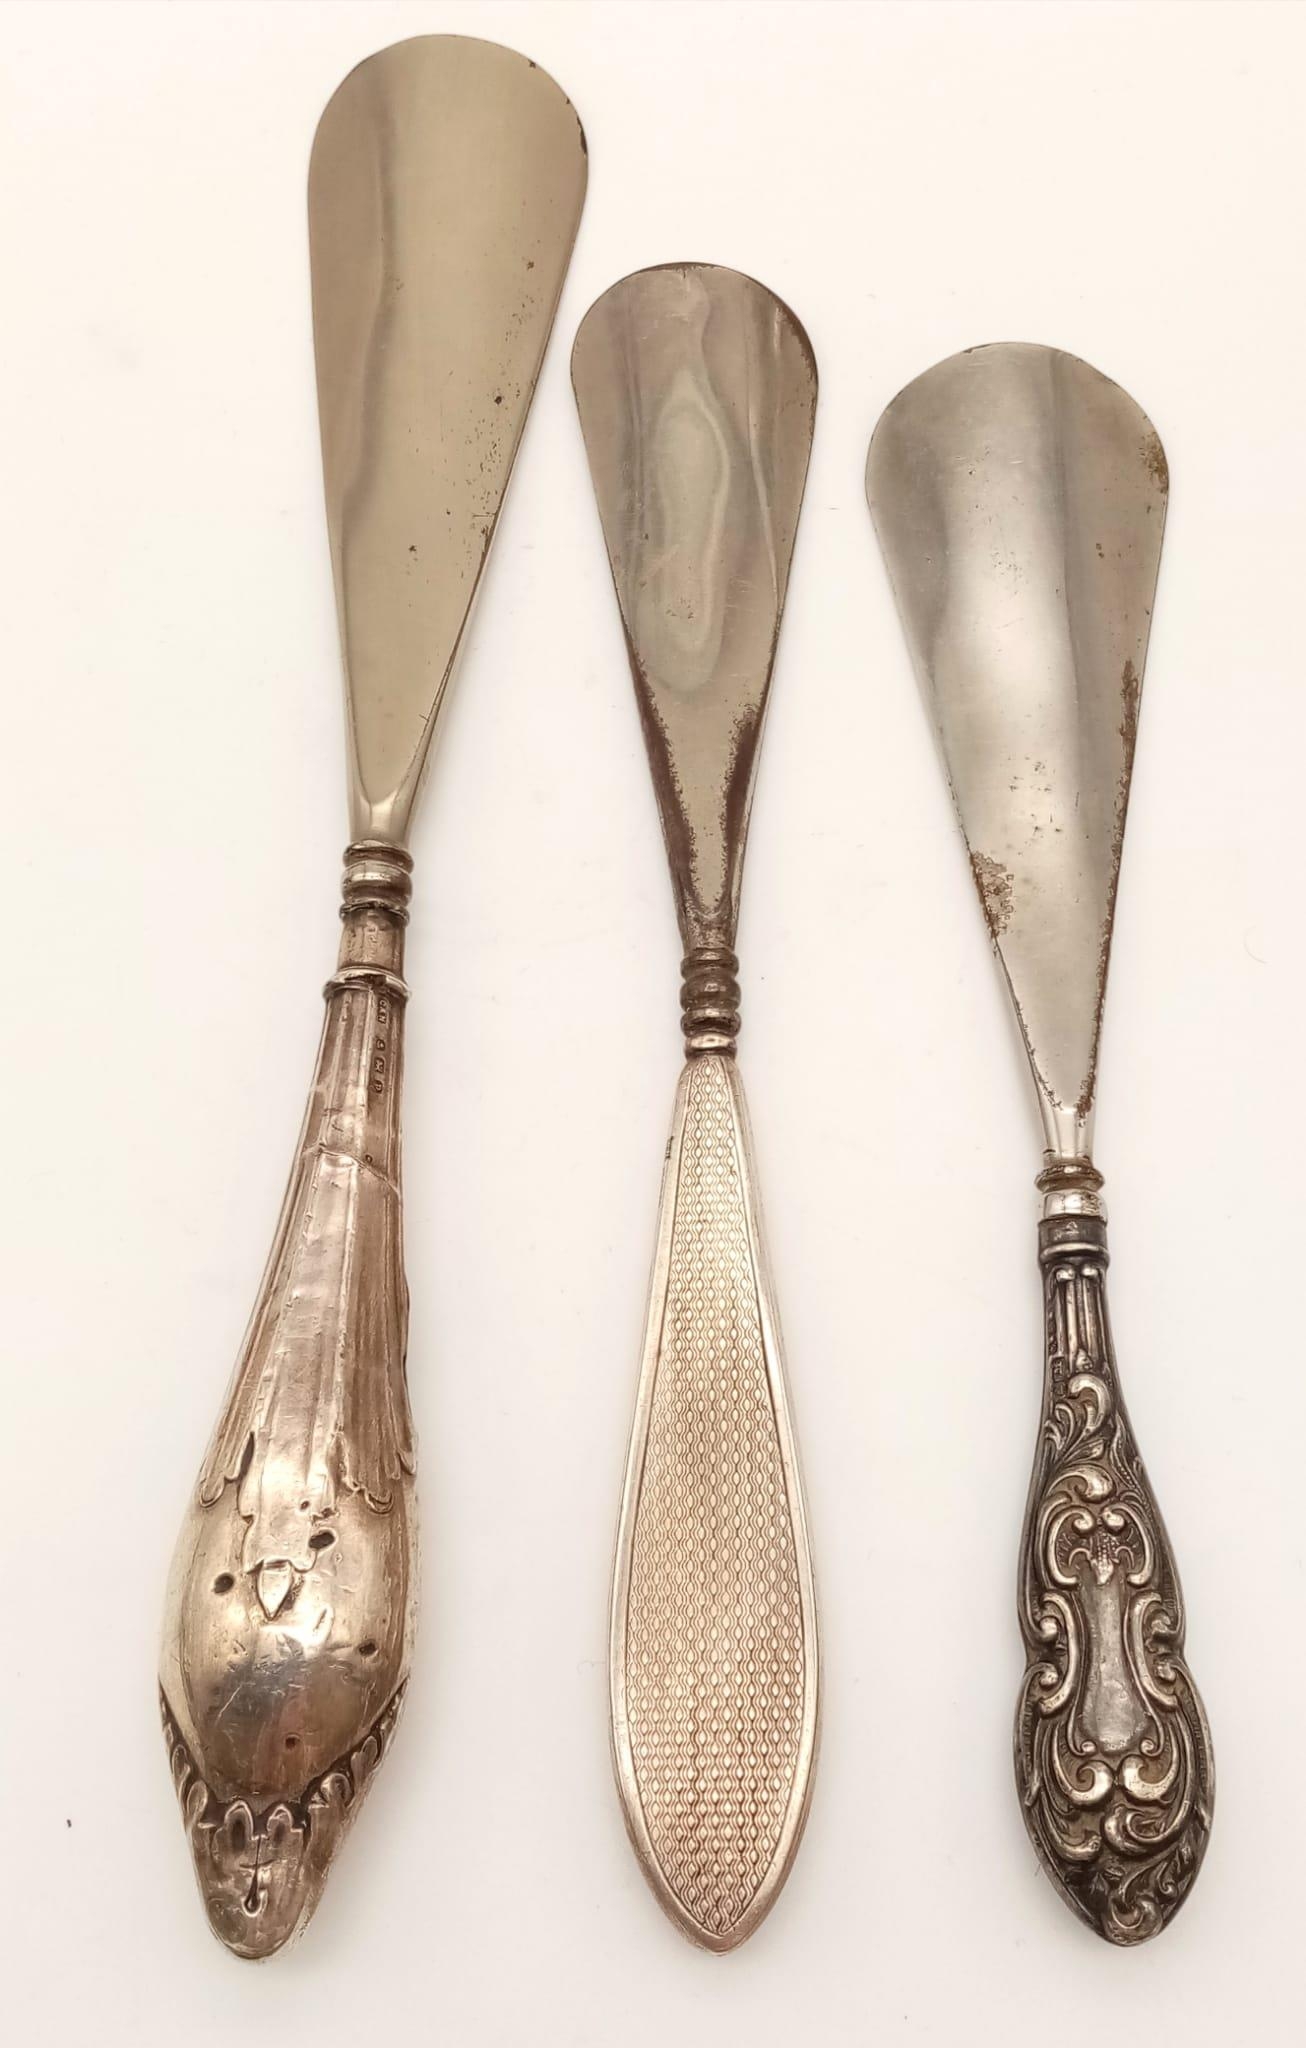 Three Antique Silver Handled Shoehorns. Hallmarks for Birmingham 1908, 14 and 25. 23cm - longest